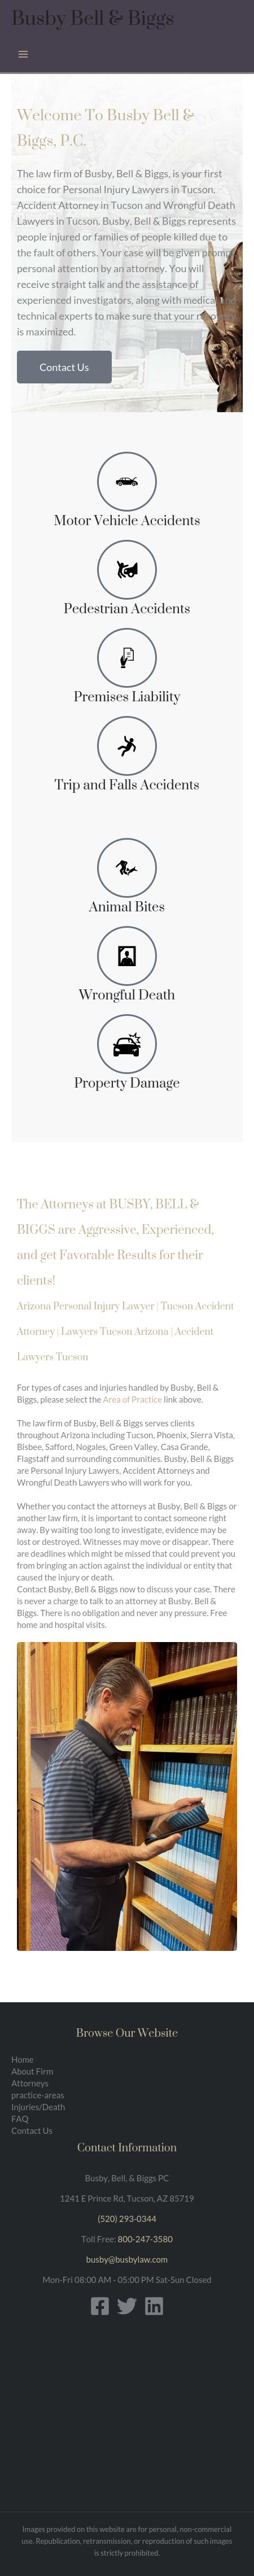 The Law Firm of Busby, Bell & Biggs, P.C. - Tucson AZ Lawyers